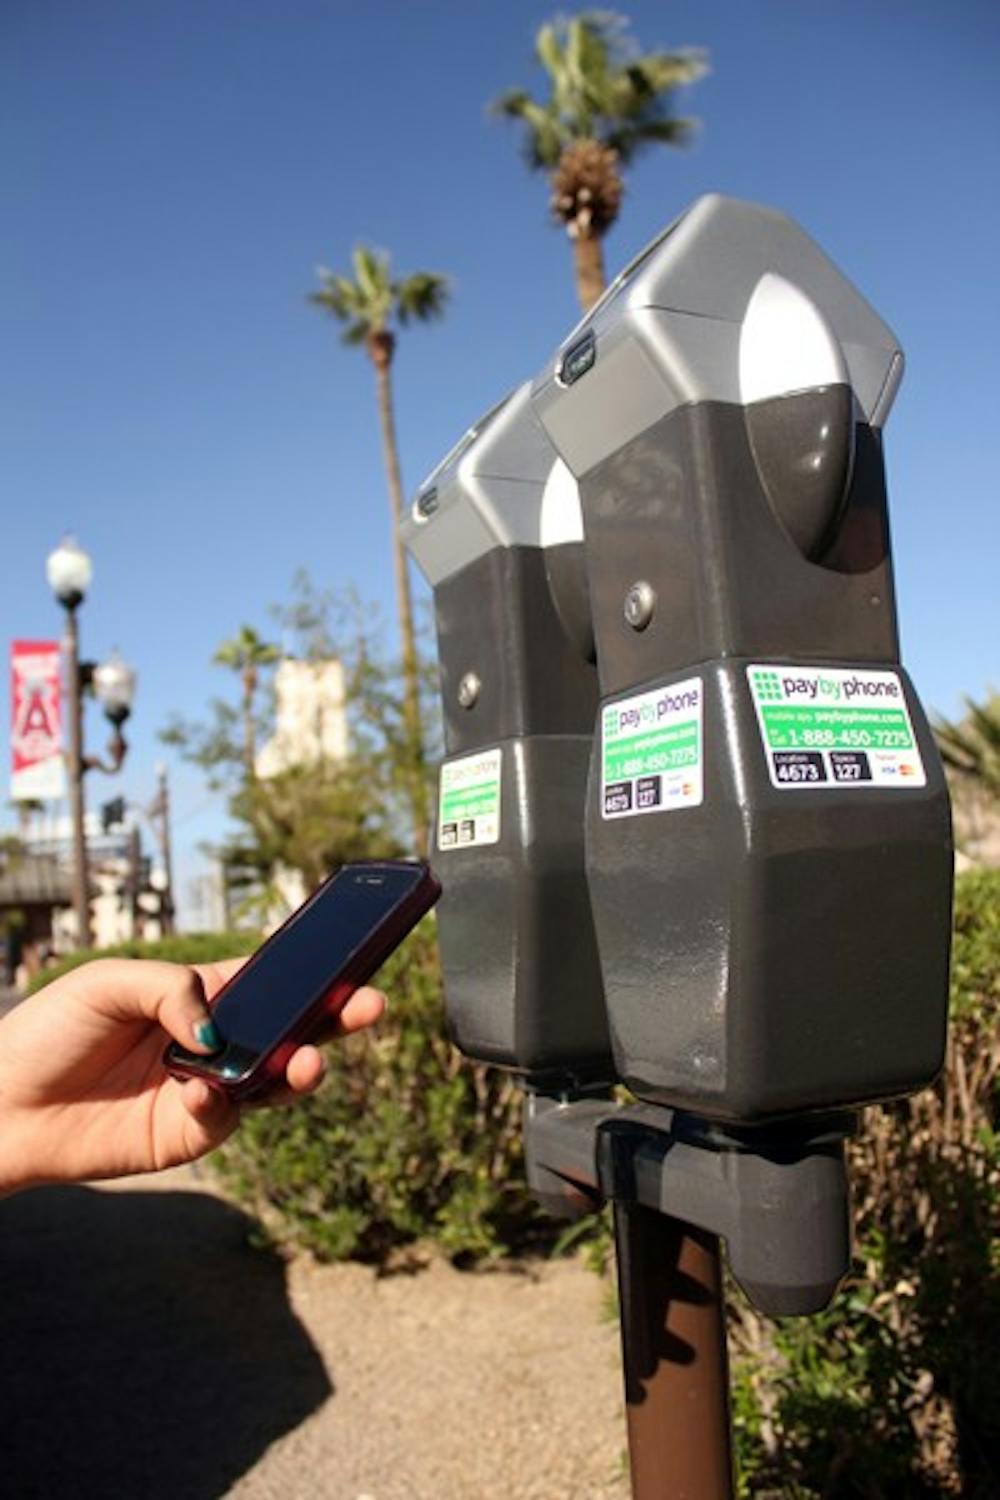 A new phone application will allow drivers to easily pay for parking at Mill Avenue District meters. (Photo by Jenn Allen)